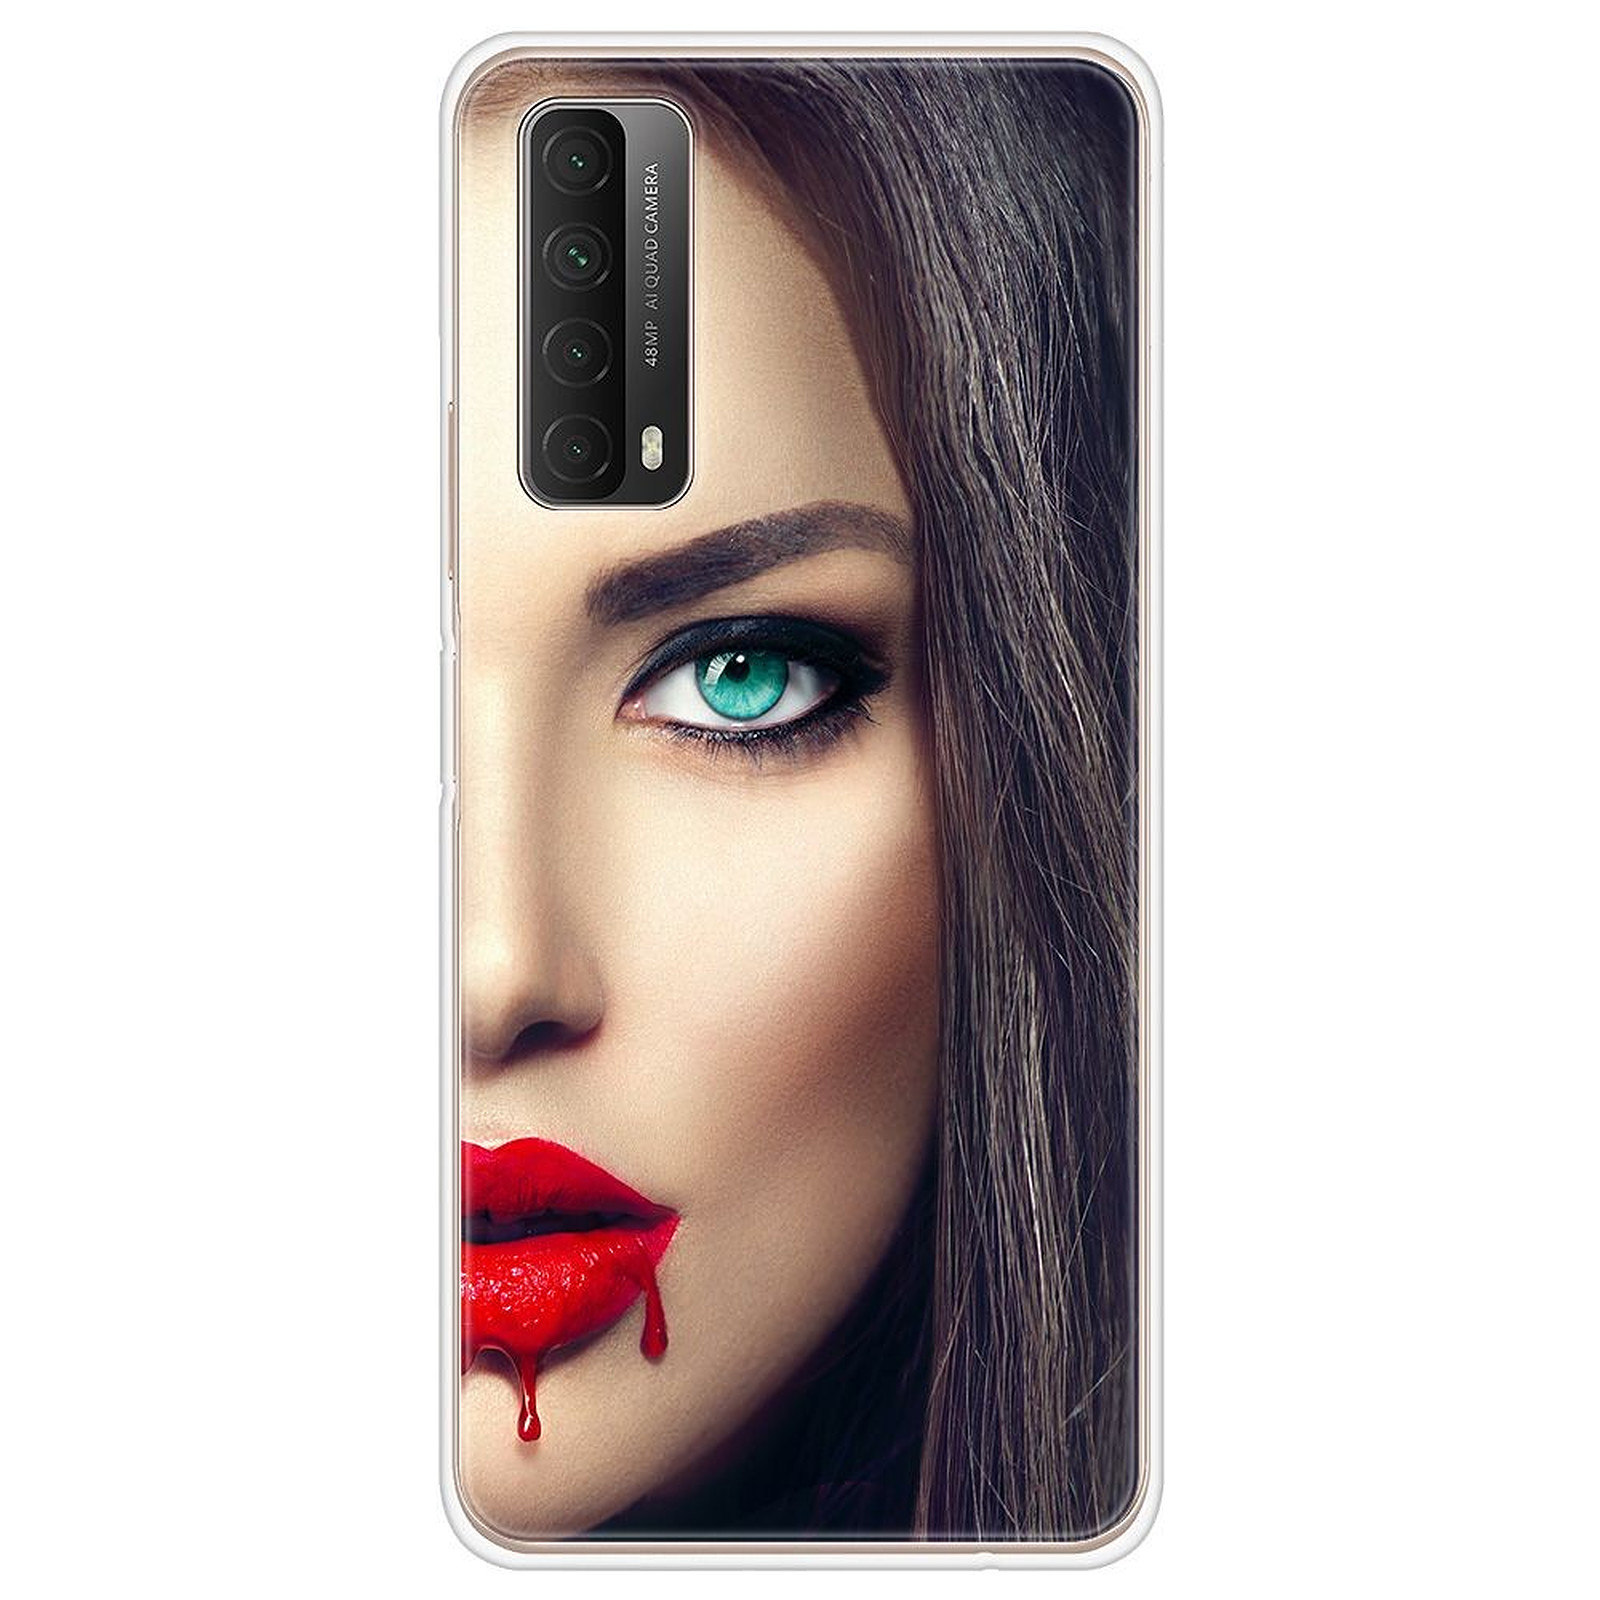 1001 Coques Coque silicone gel Huawei P Smart 2021 motif Lèvres Sang - Coque telephone 1001Coques